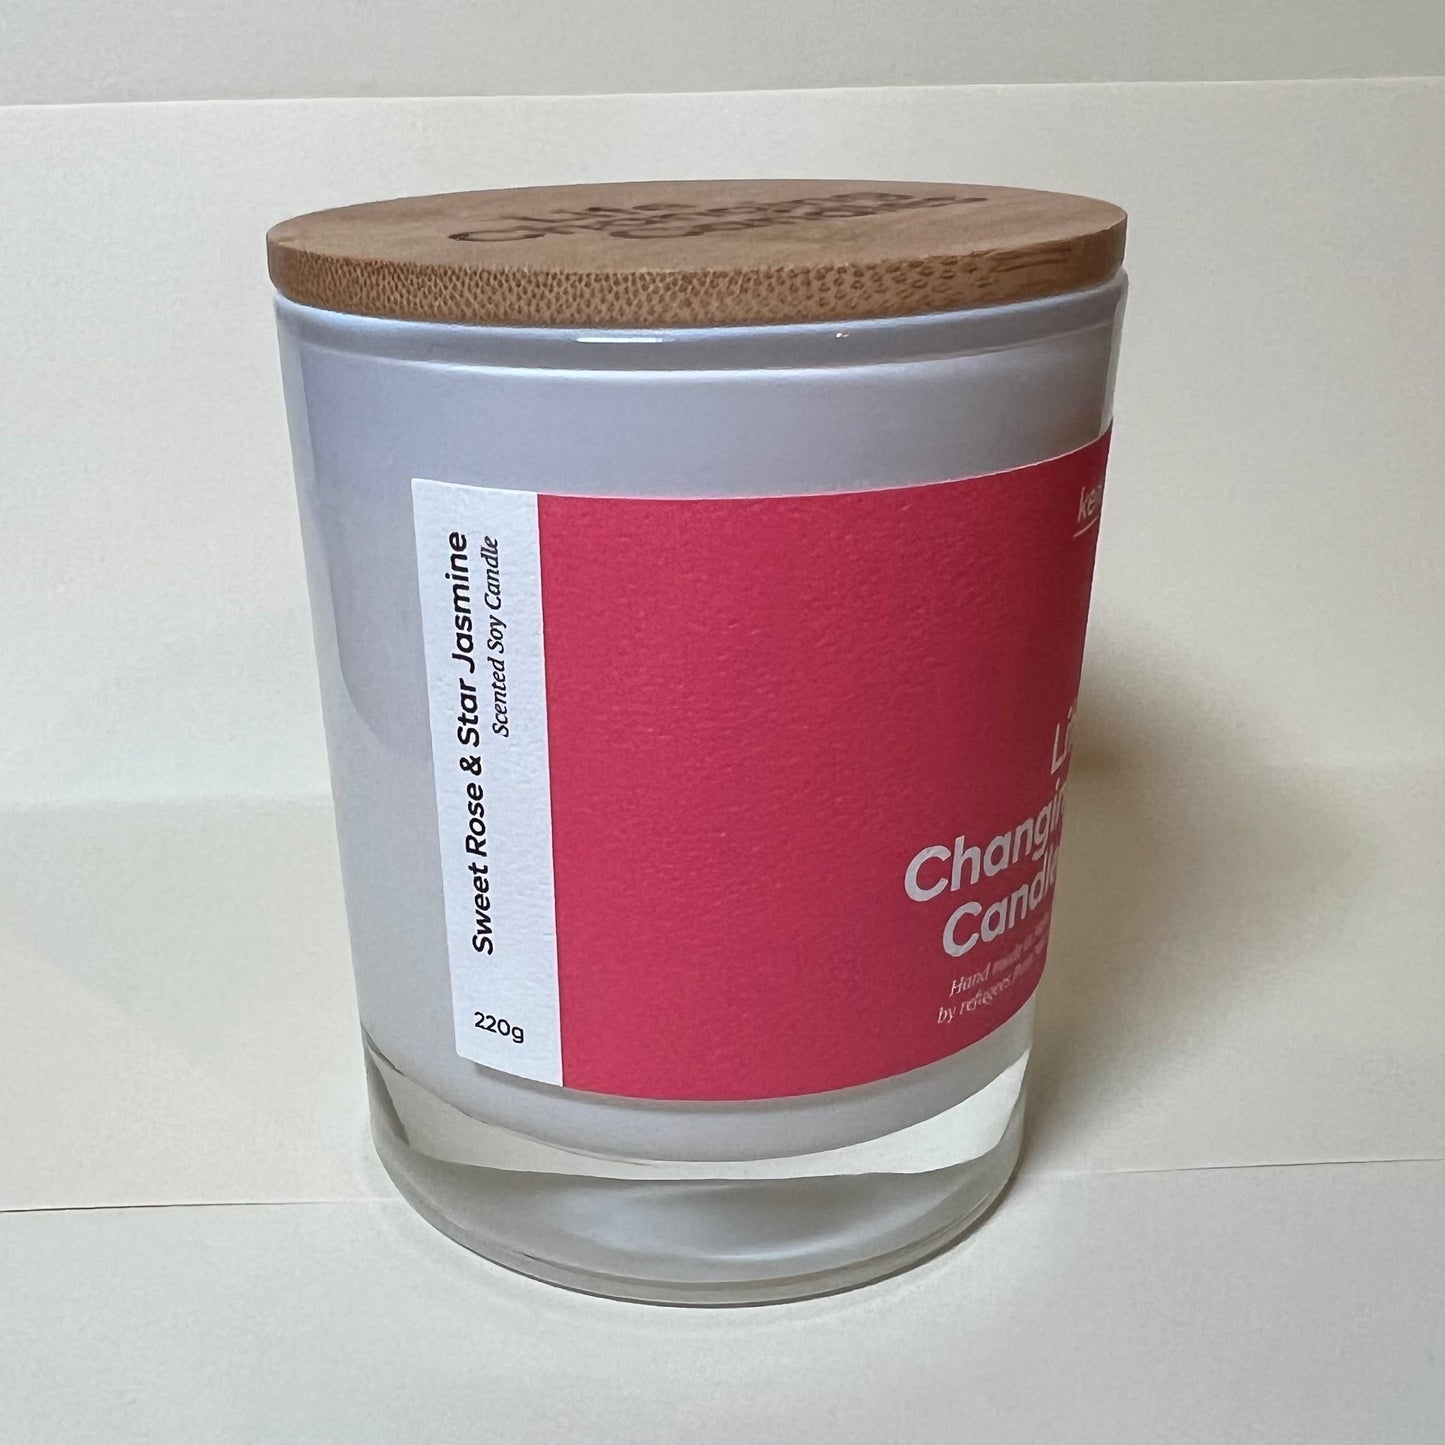 Mid-size candle 220g